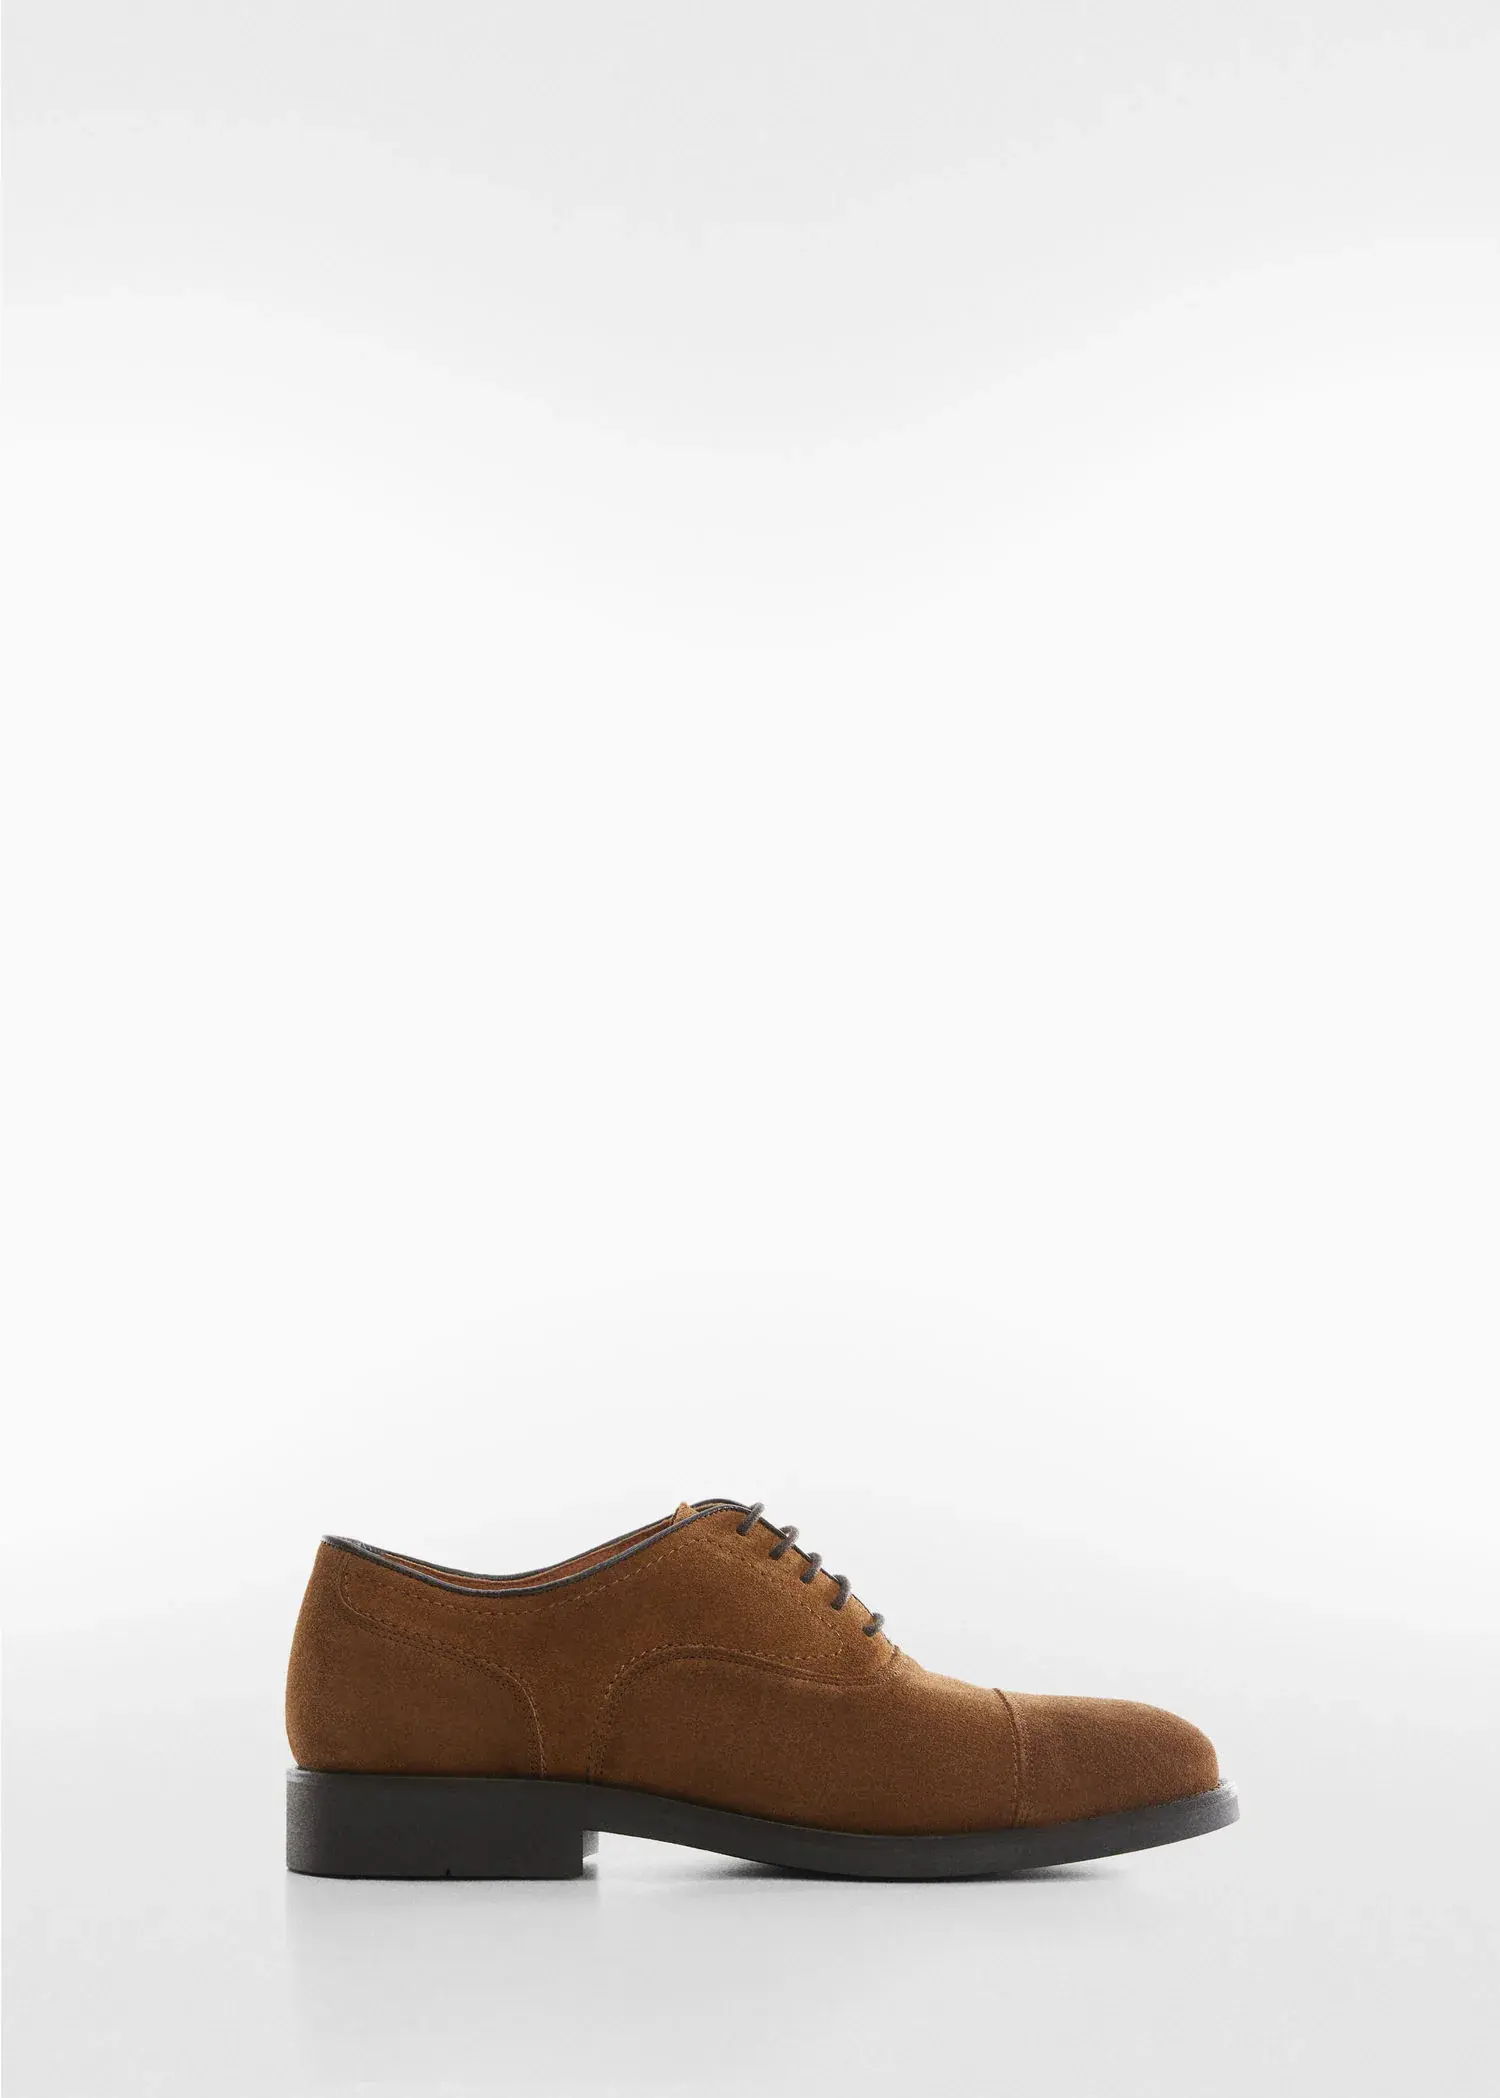 Mango Split leather suit shoes. a pair of brown shoes on a white background. 